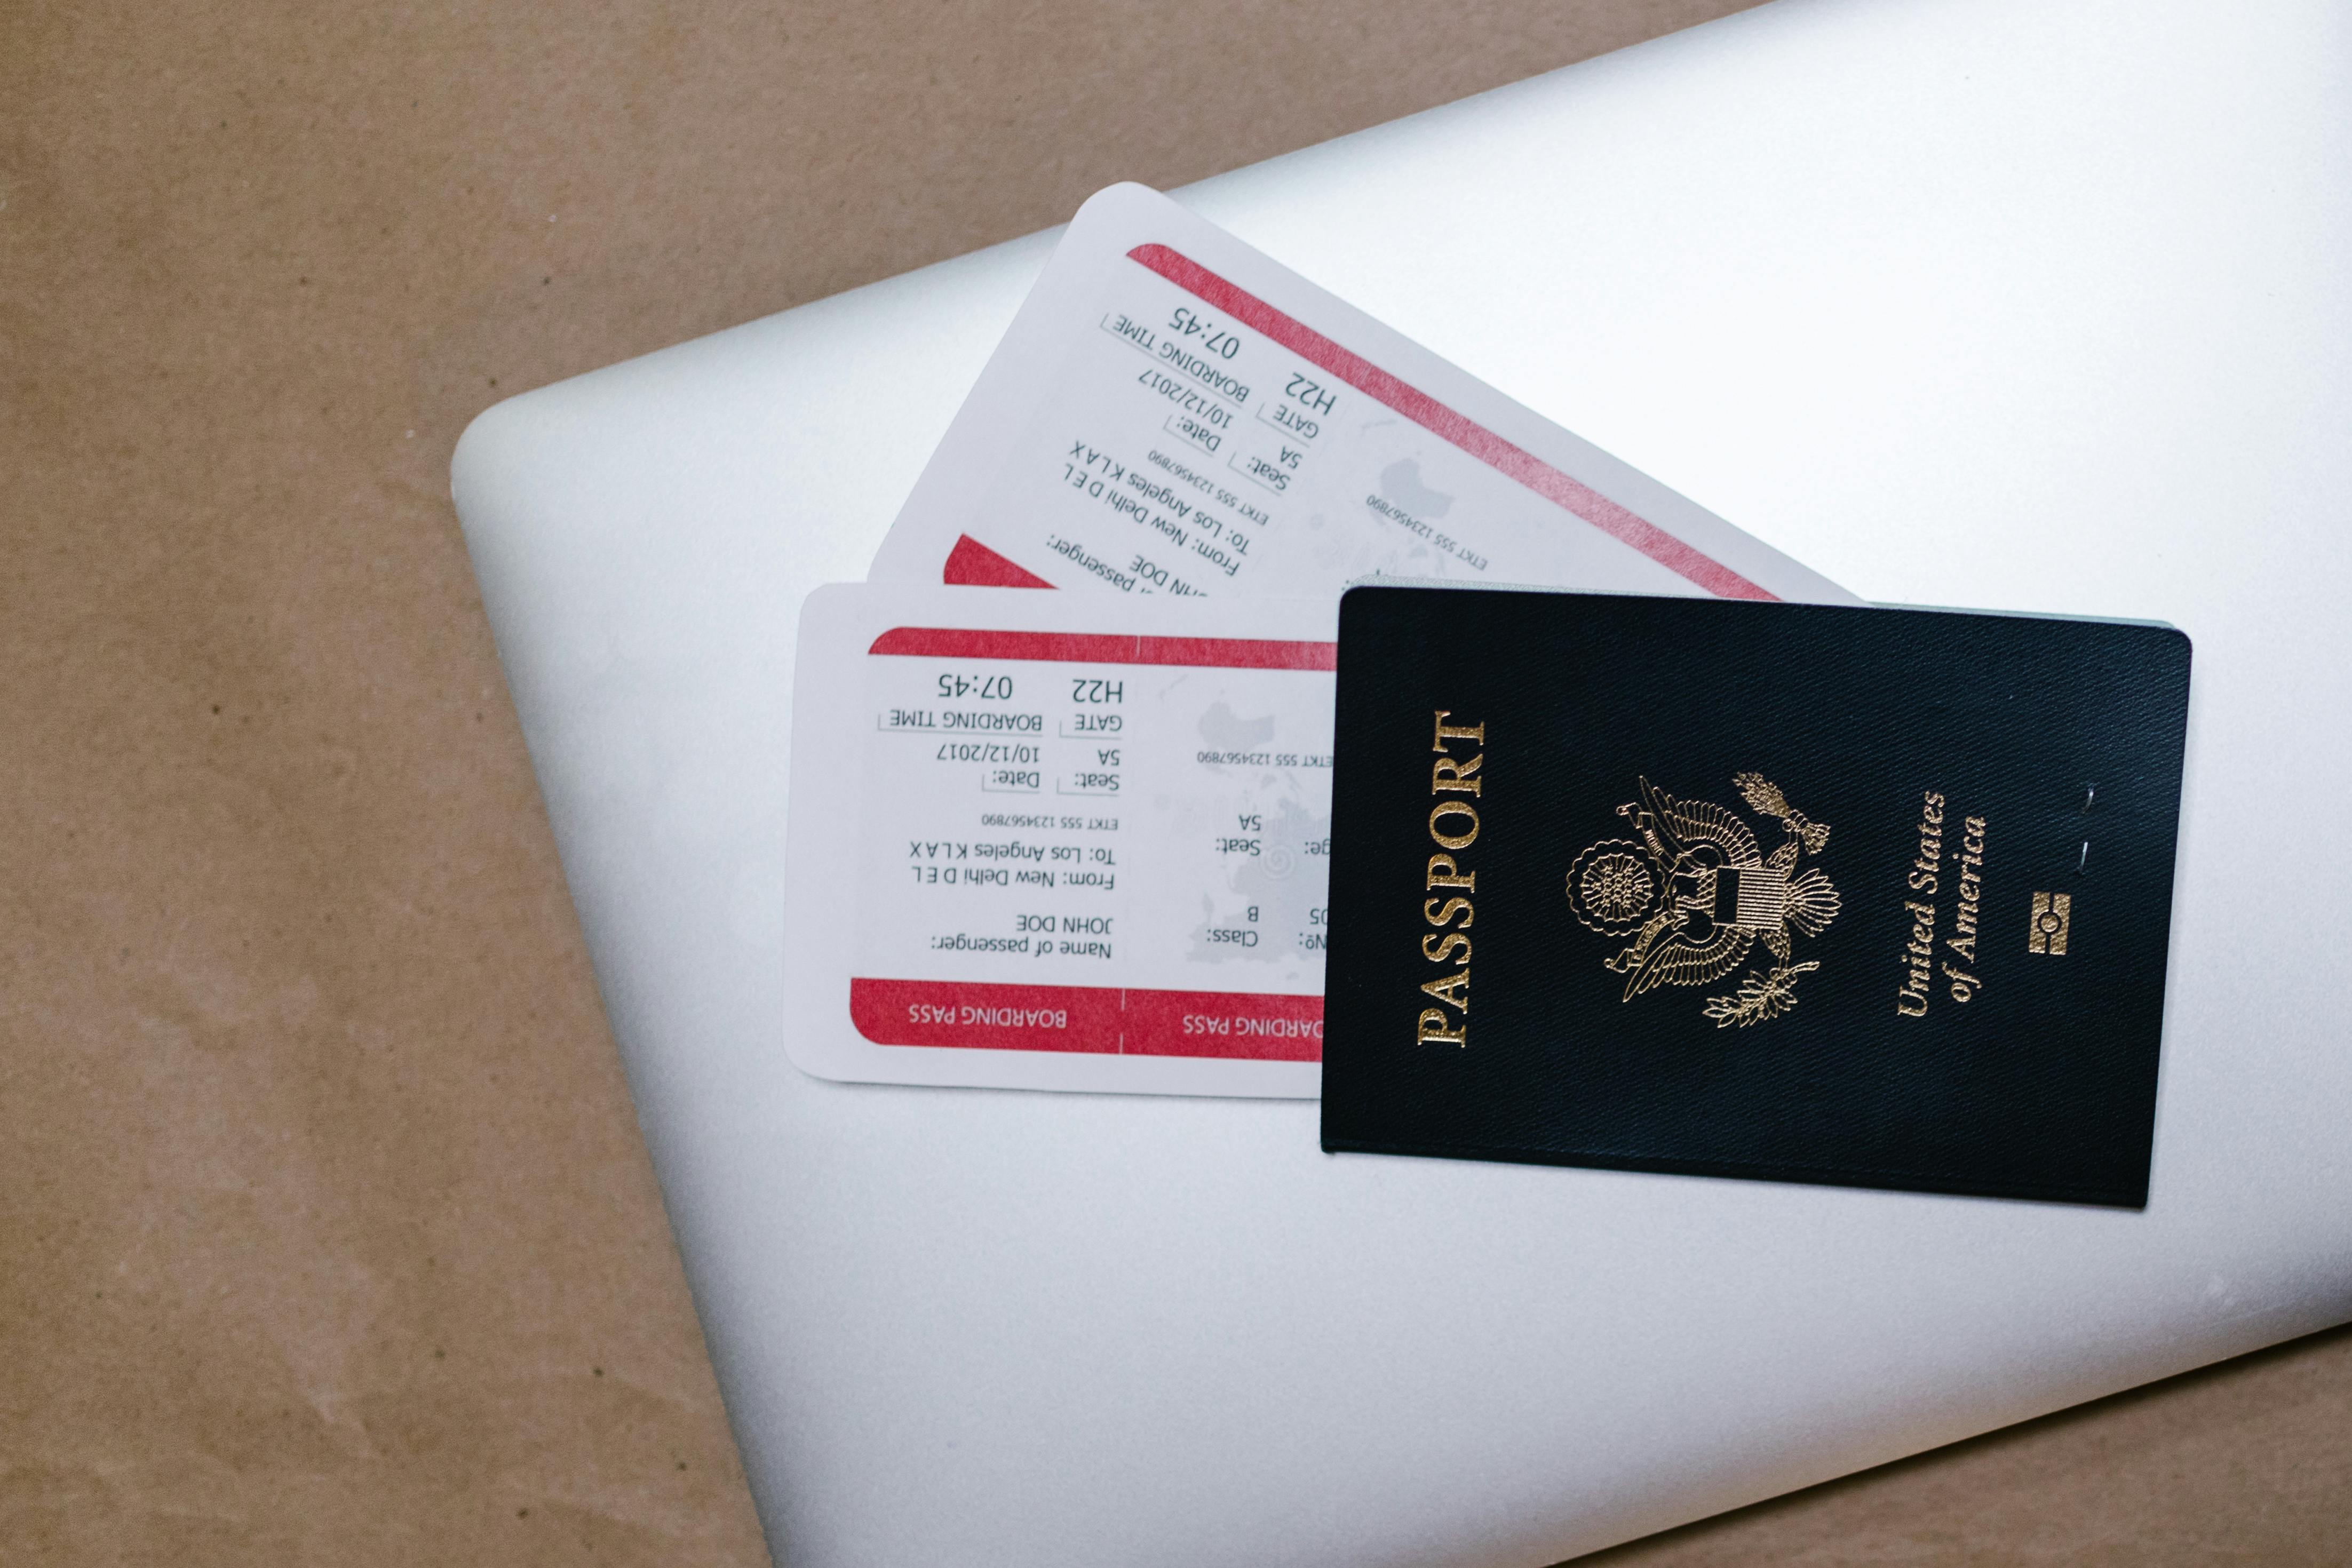 boarding passes kept within the passport on a laptop